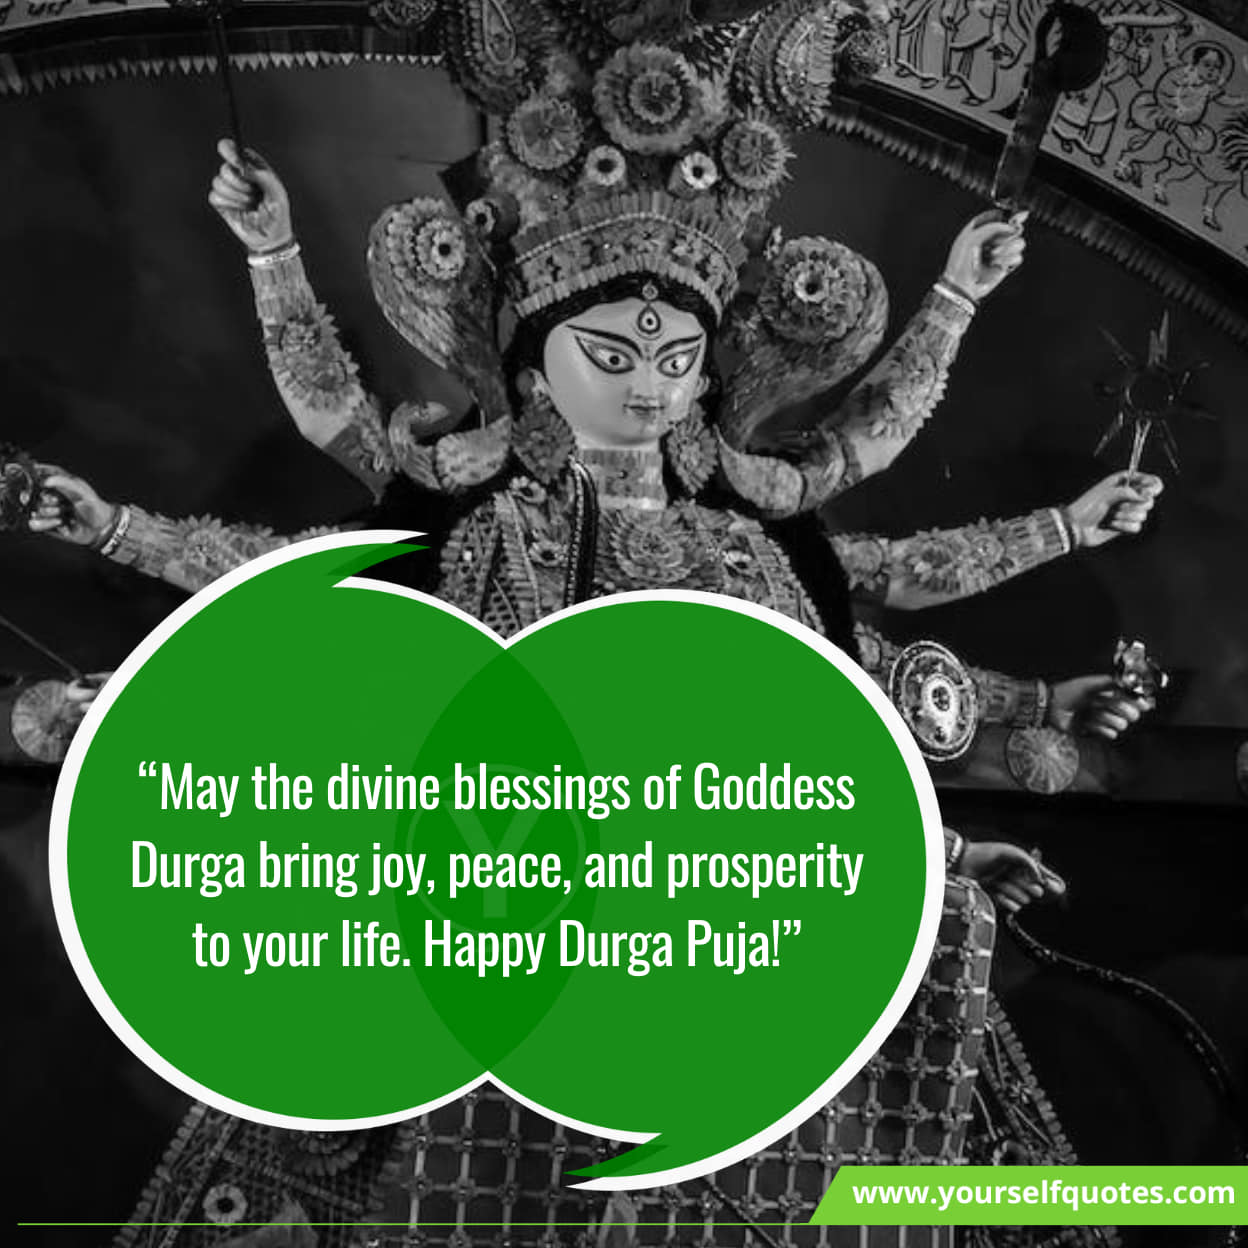 Durga Puja happiness and good wishes